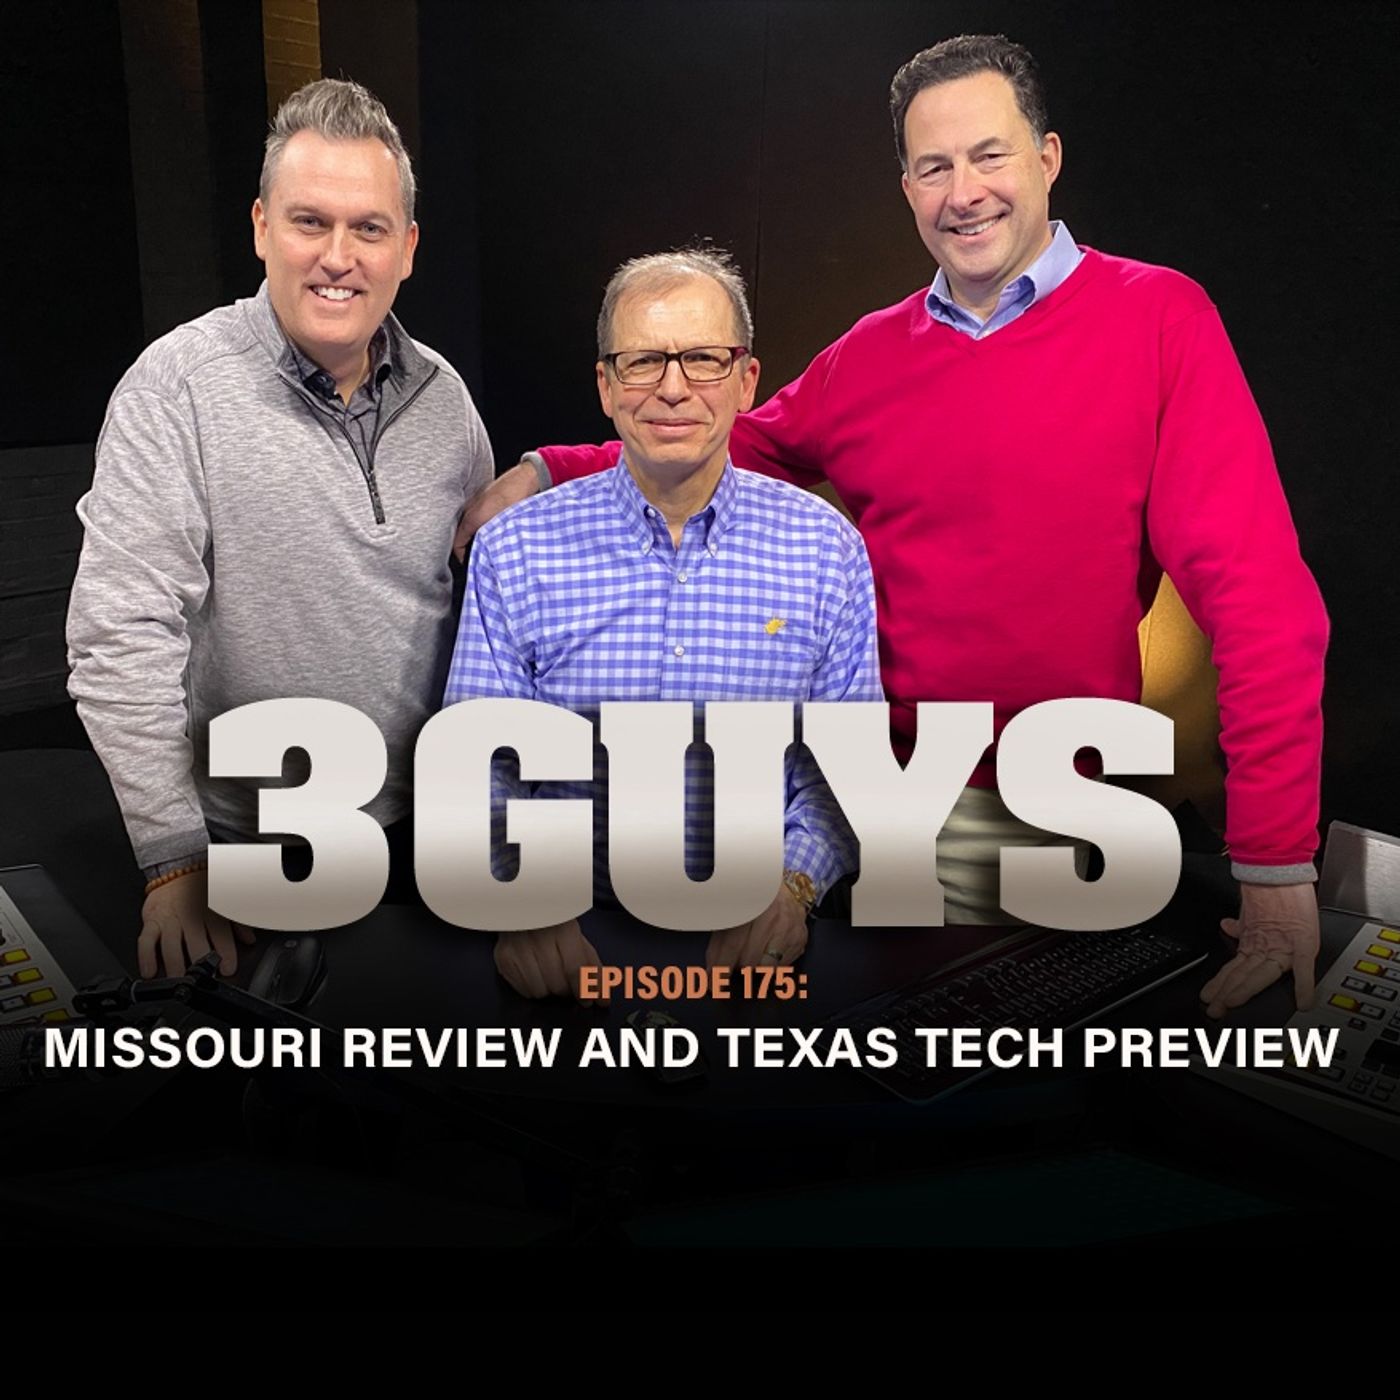 Missouri Review and Texas Tech Preview with Tony Caridi, Brad Howe and Hoppy Kercheval